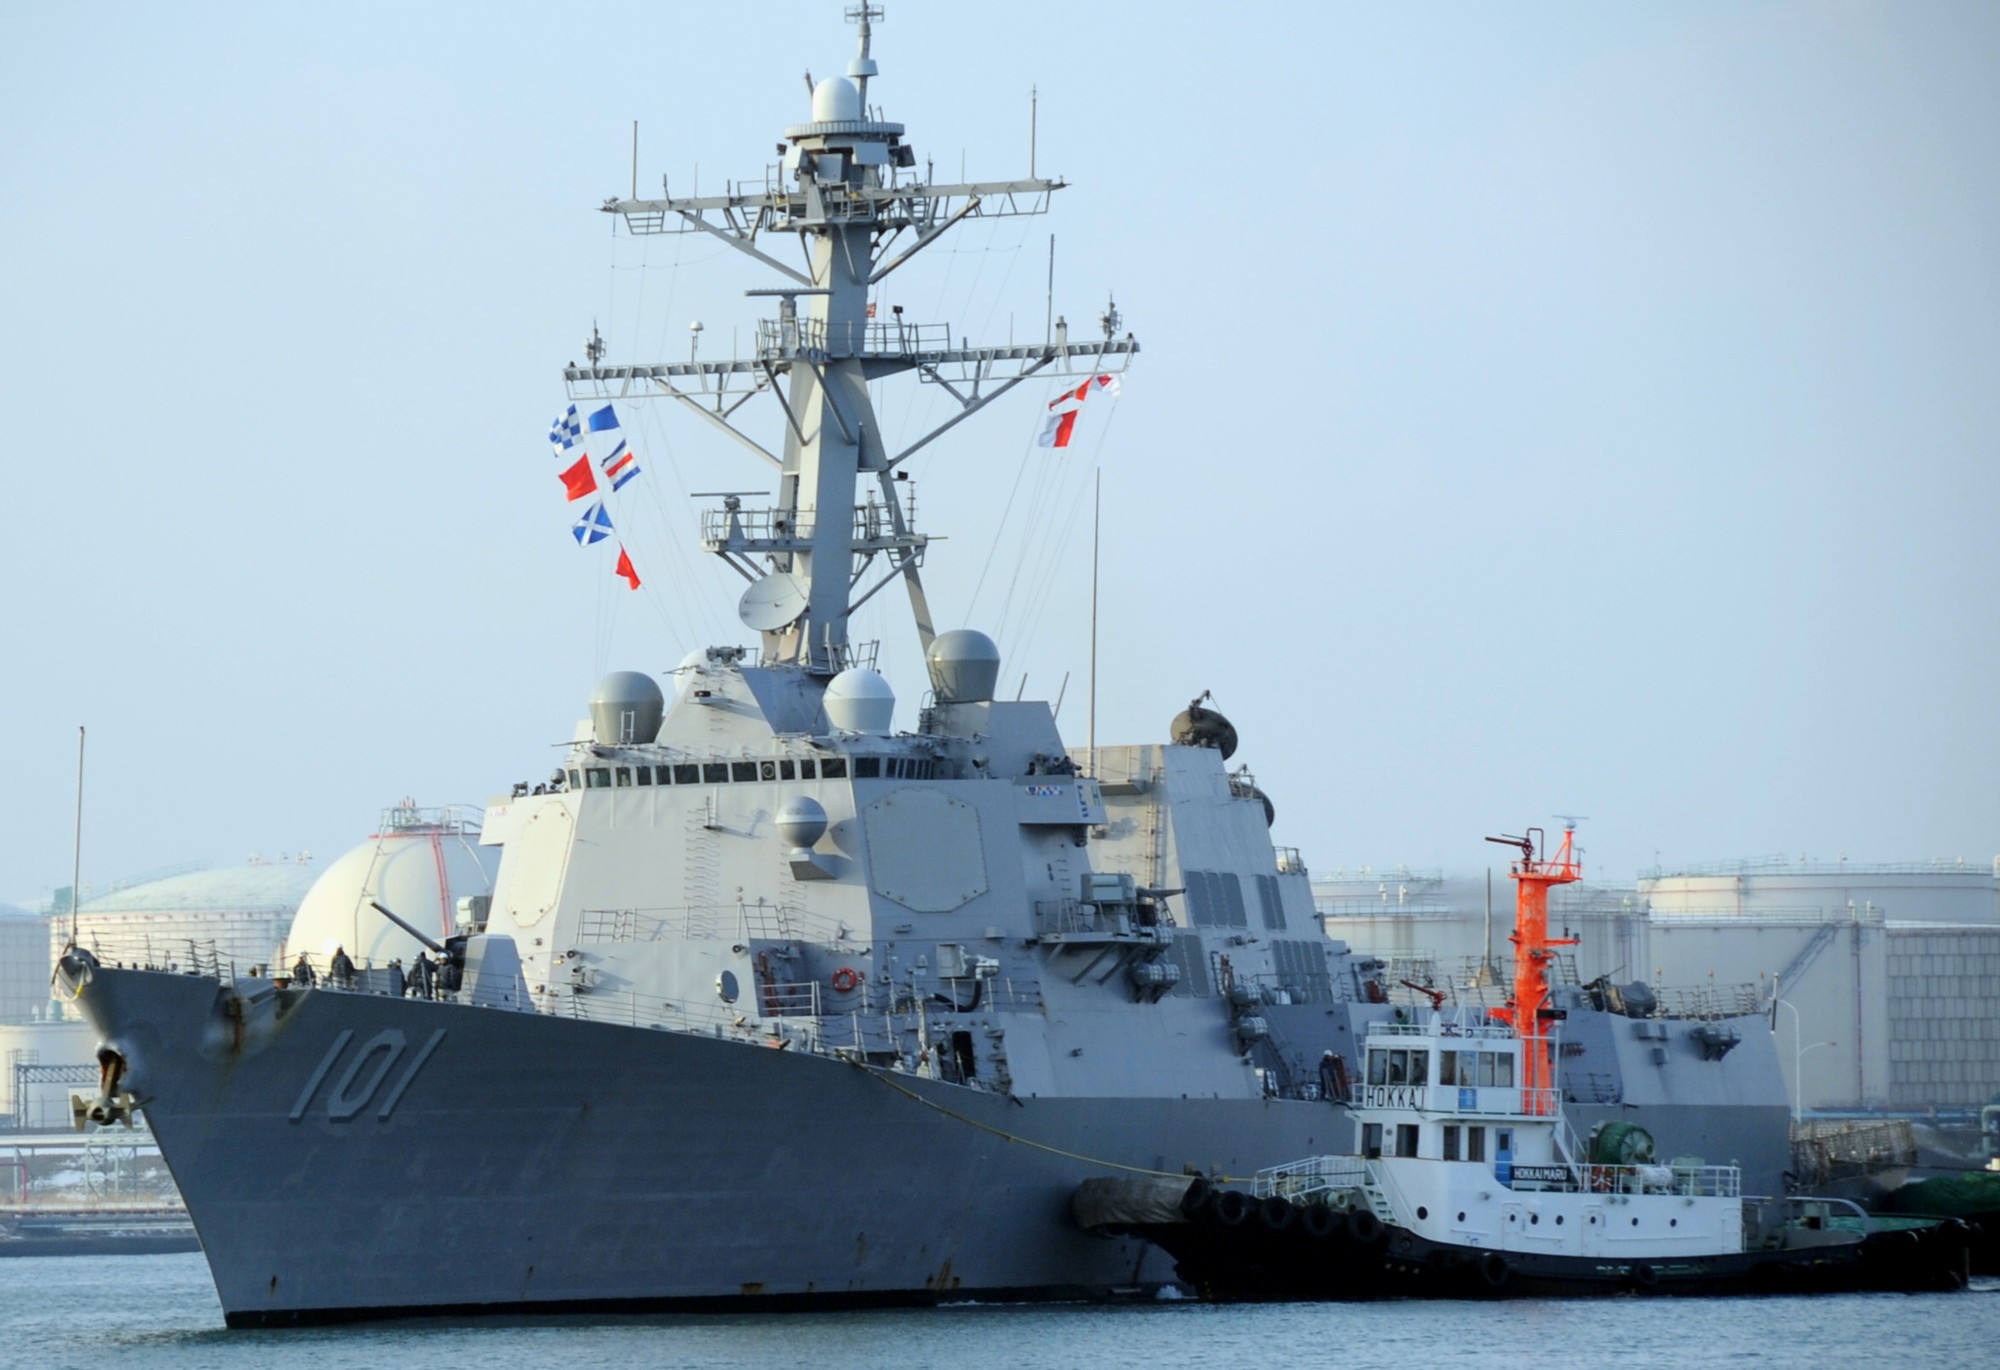 ddg-101 uss gridley arleigh burke class guided missile destroyer aegis us navy tomakomei japan 48